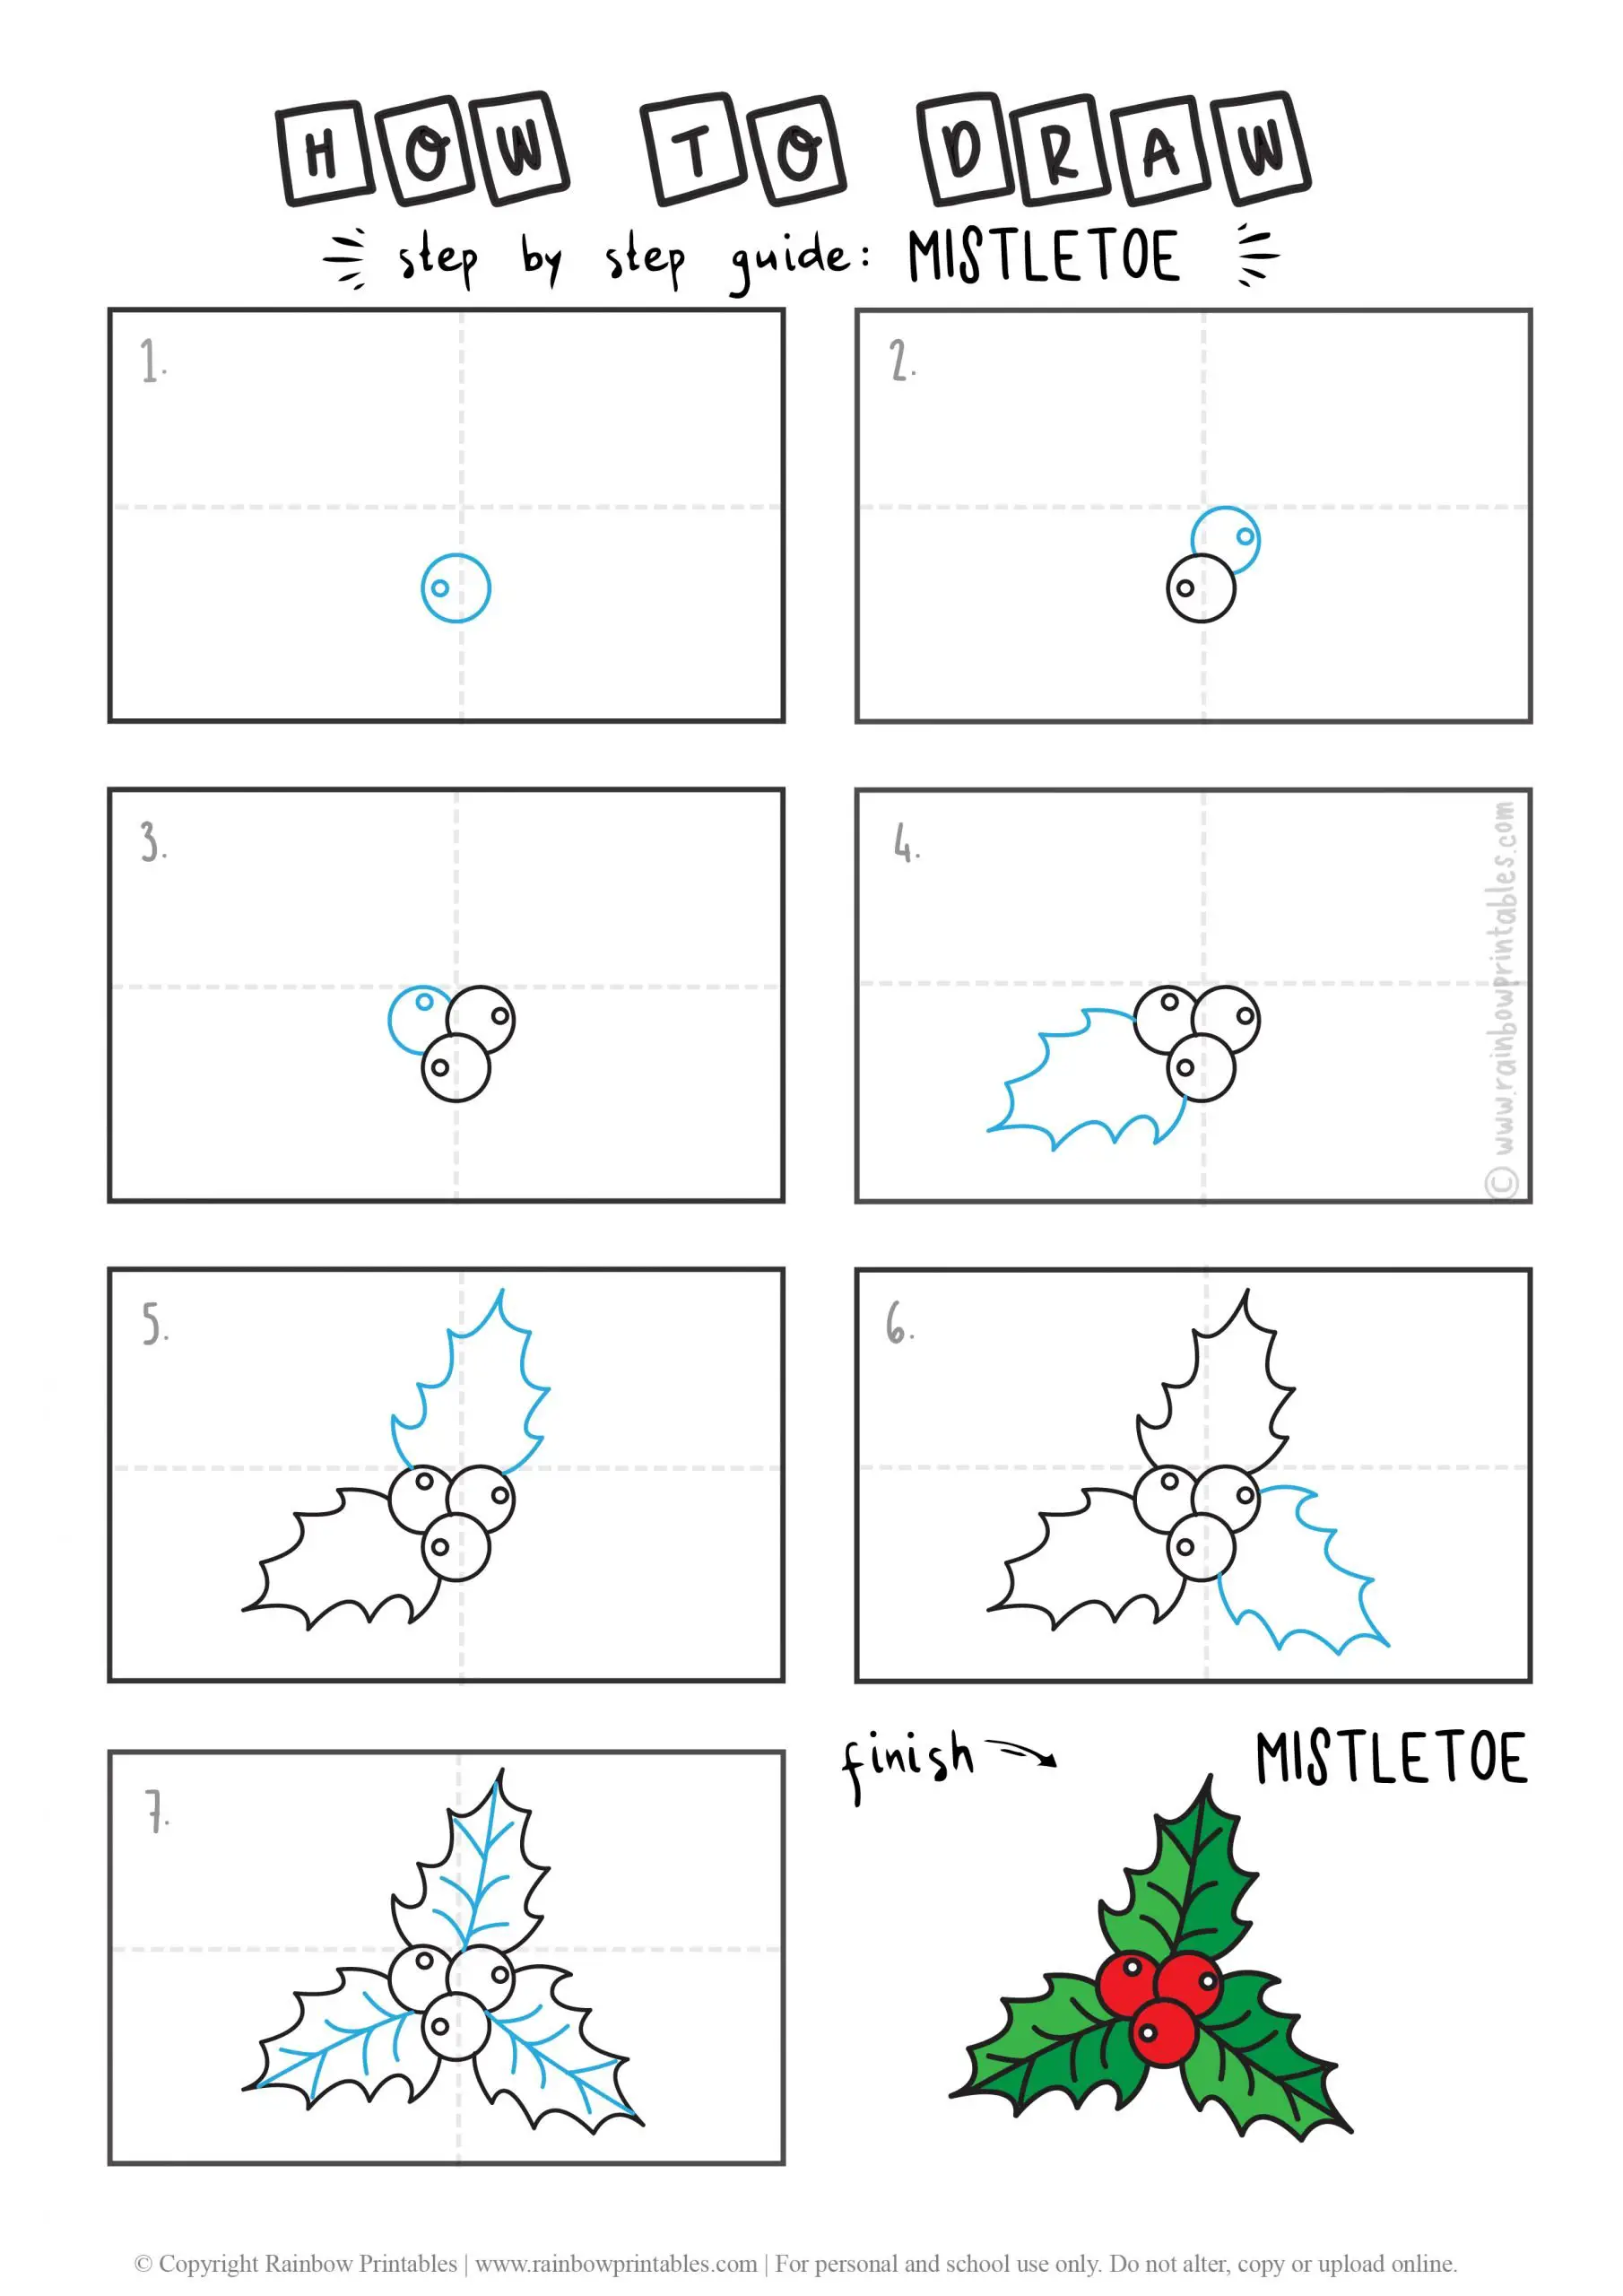 HOW TO DRAW A CHRISTMAS MISTLETOE HOLIDAY GUIDE ILLUSTRATION STEP BY STEP EASY SIMPLE FOR KIDS